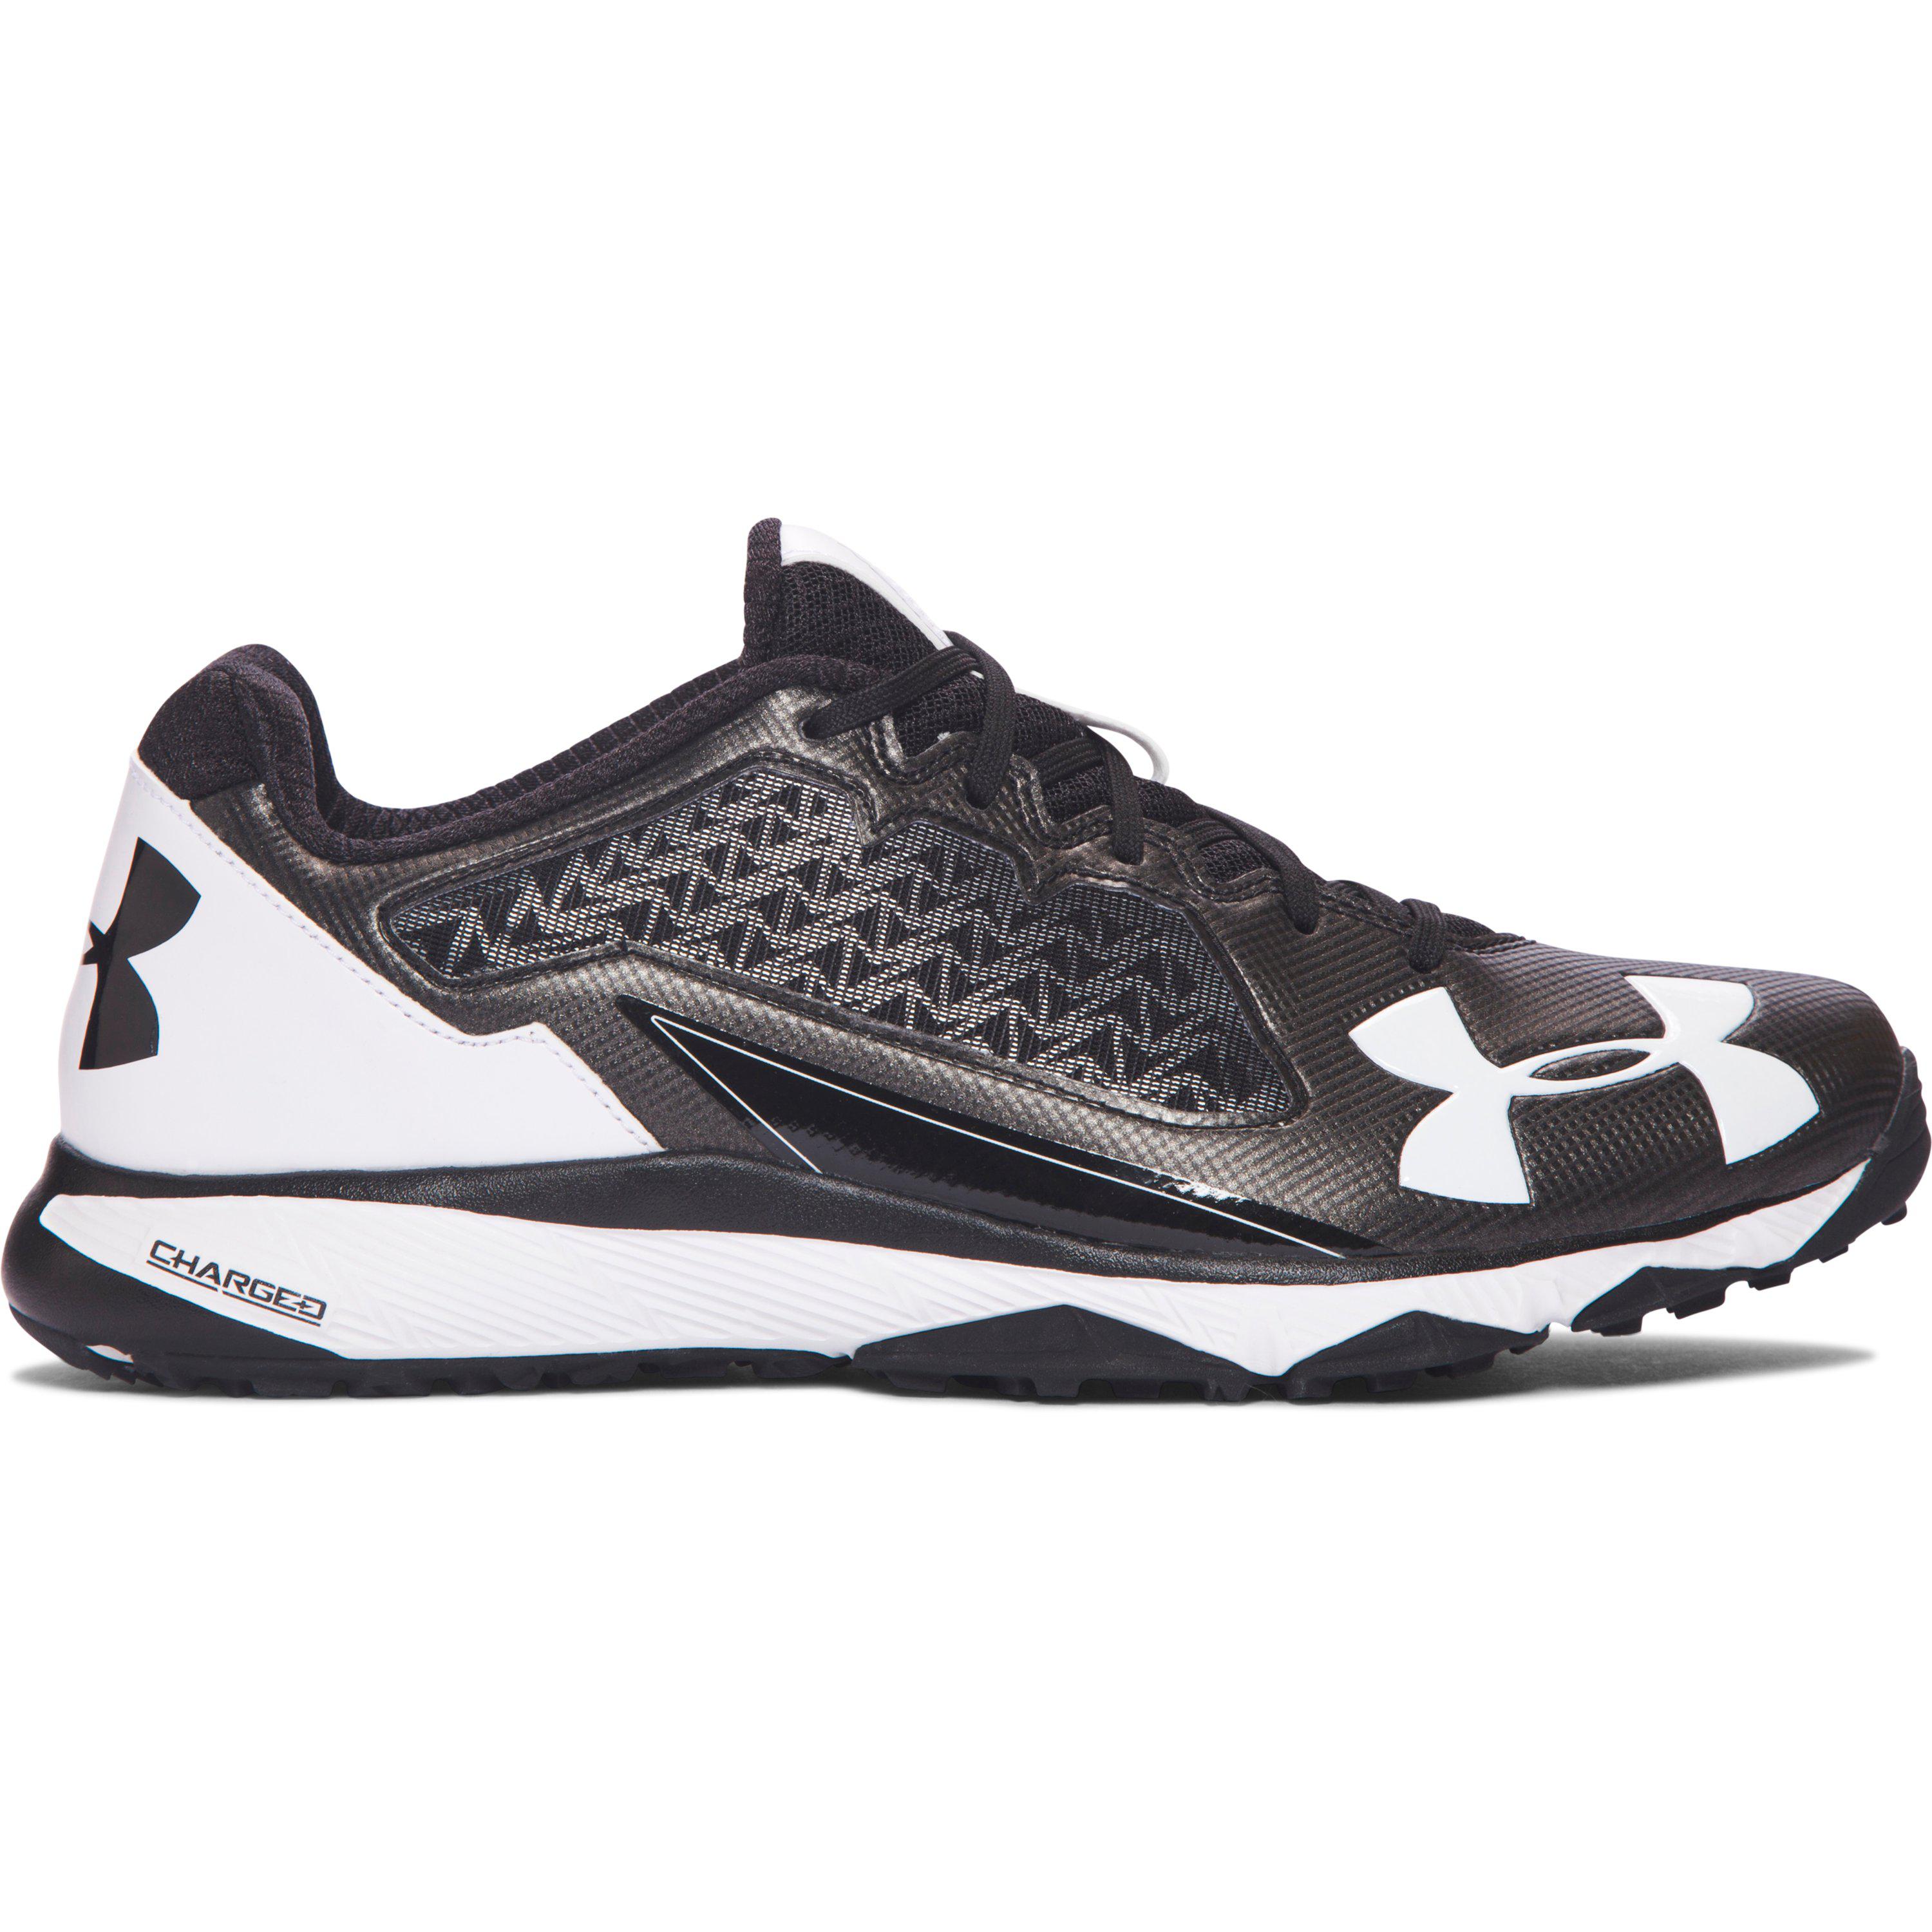 Under Armour Synthetic Men's Ua Deception Baseball Training Shoes in ...